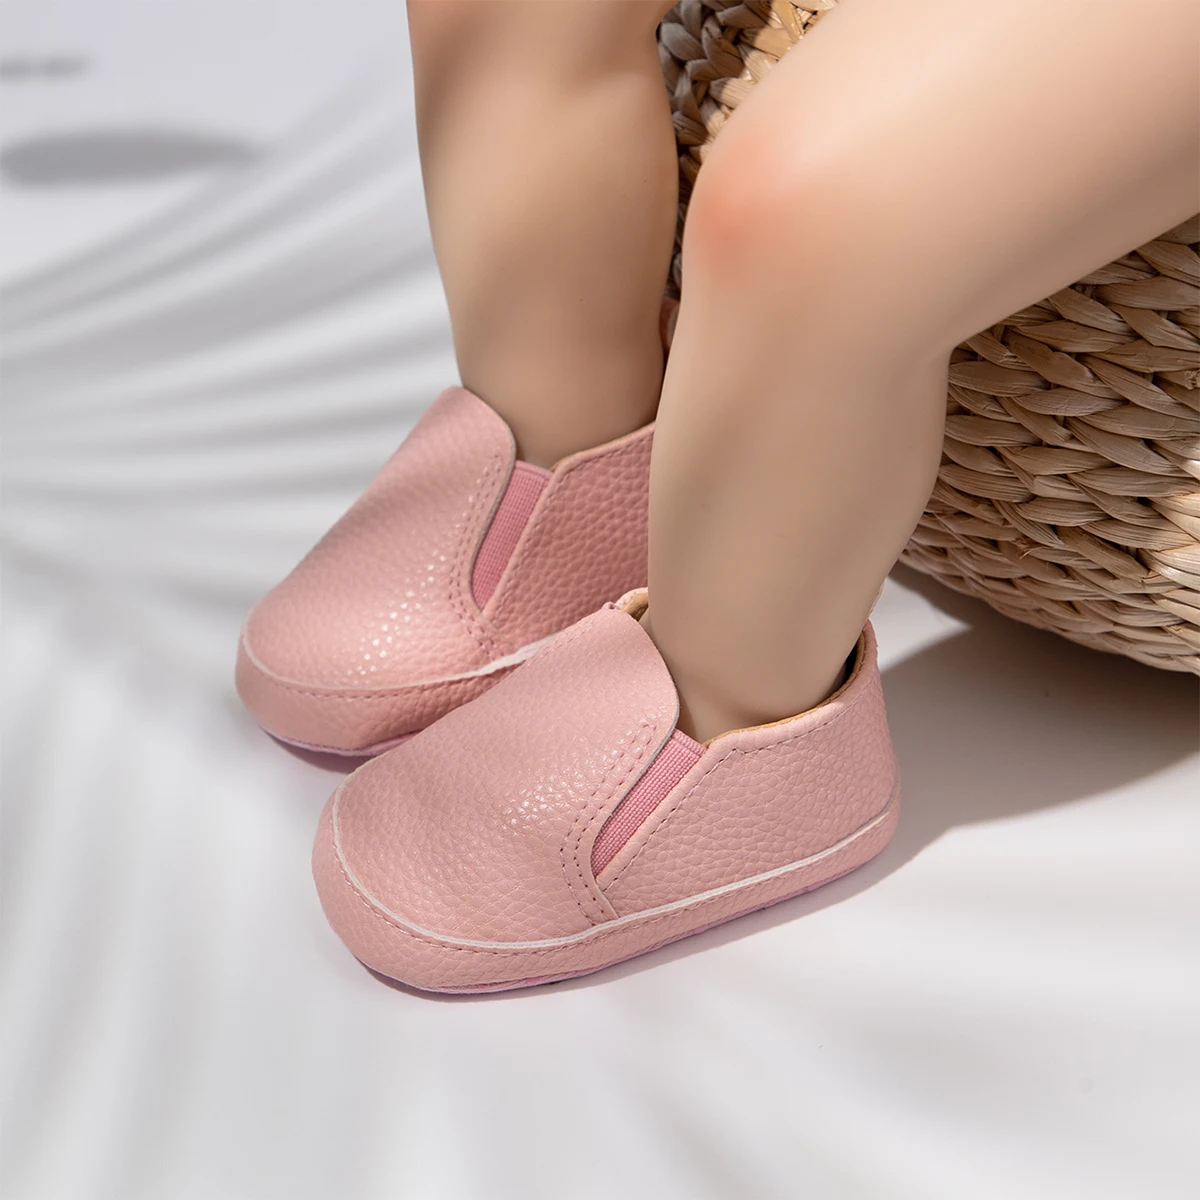 

New arrived newborn PU Leather soft-sole loafers slip on moccasin Casual baby shoes, 6 colors